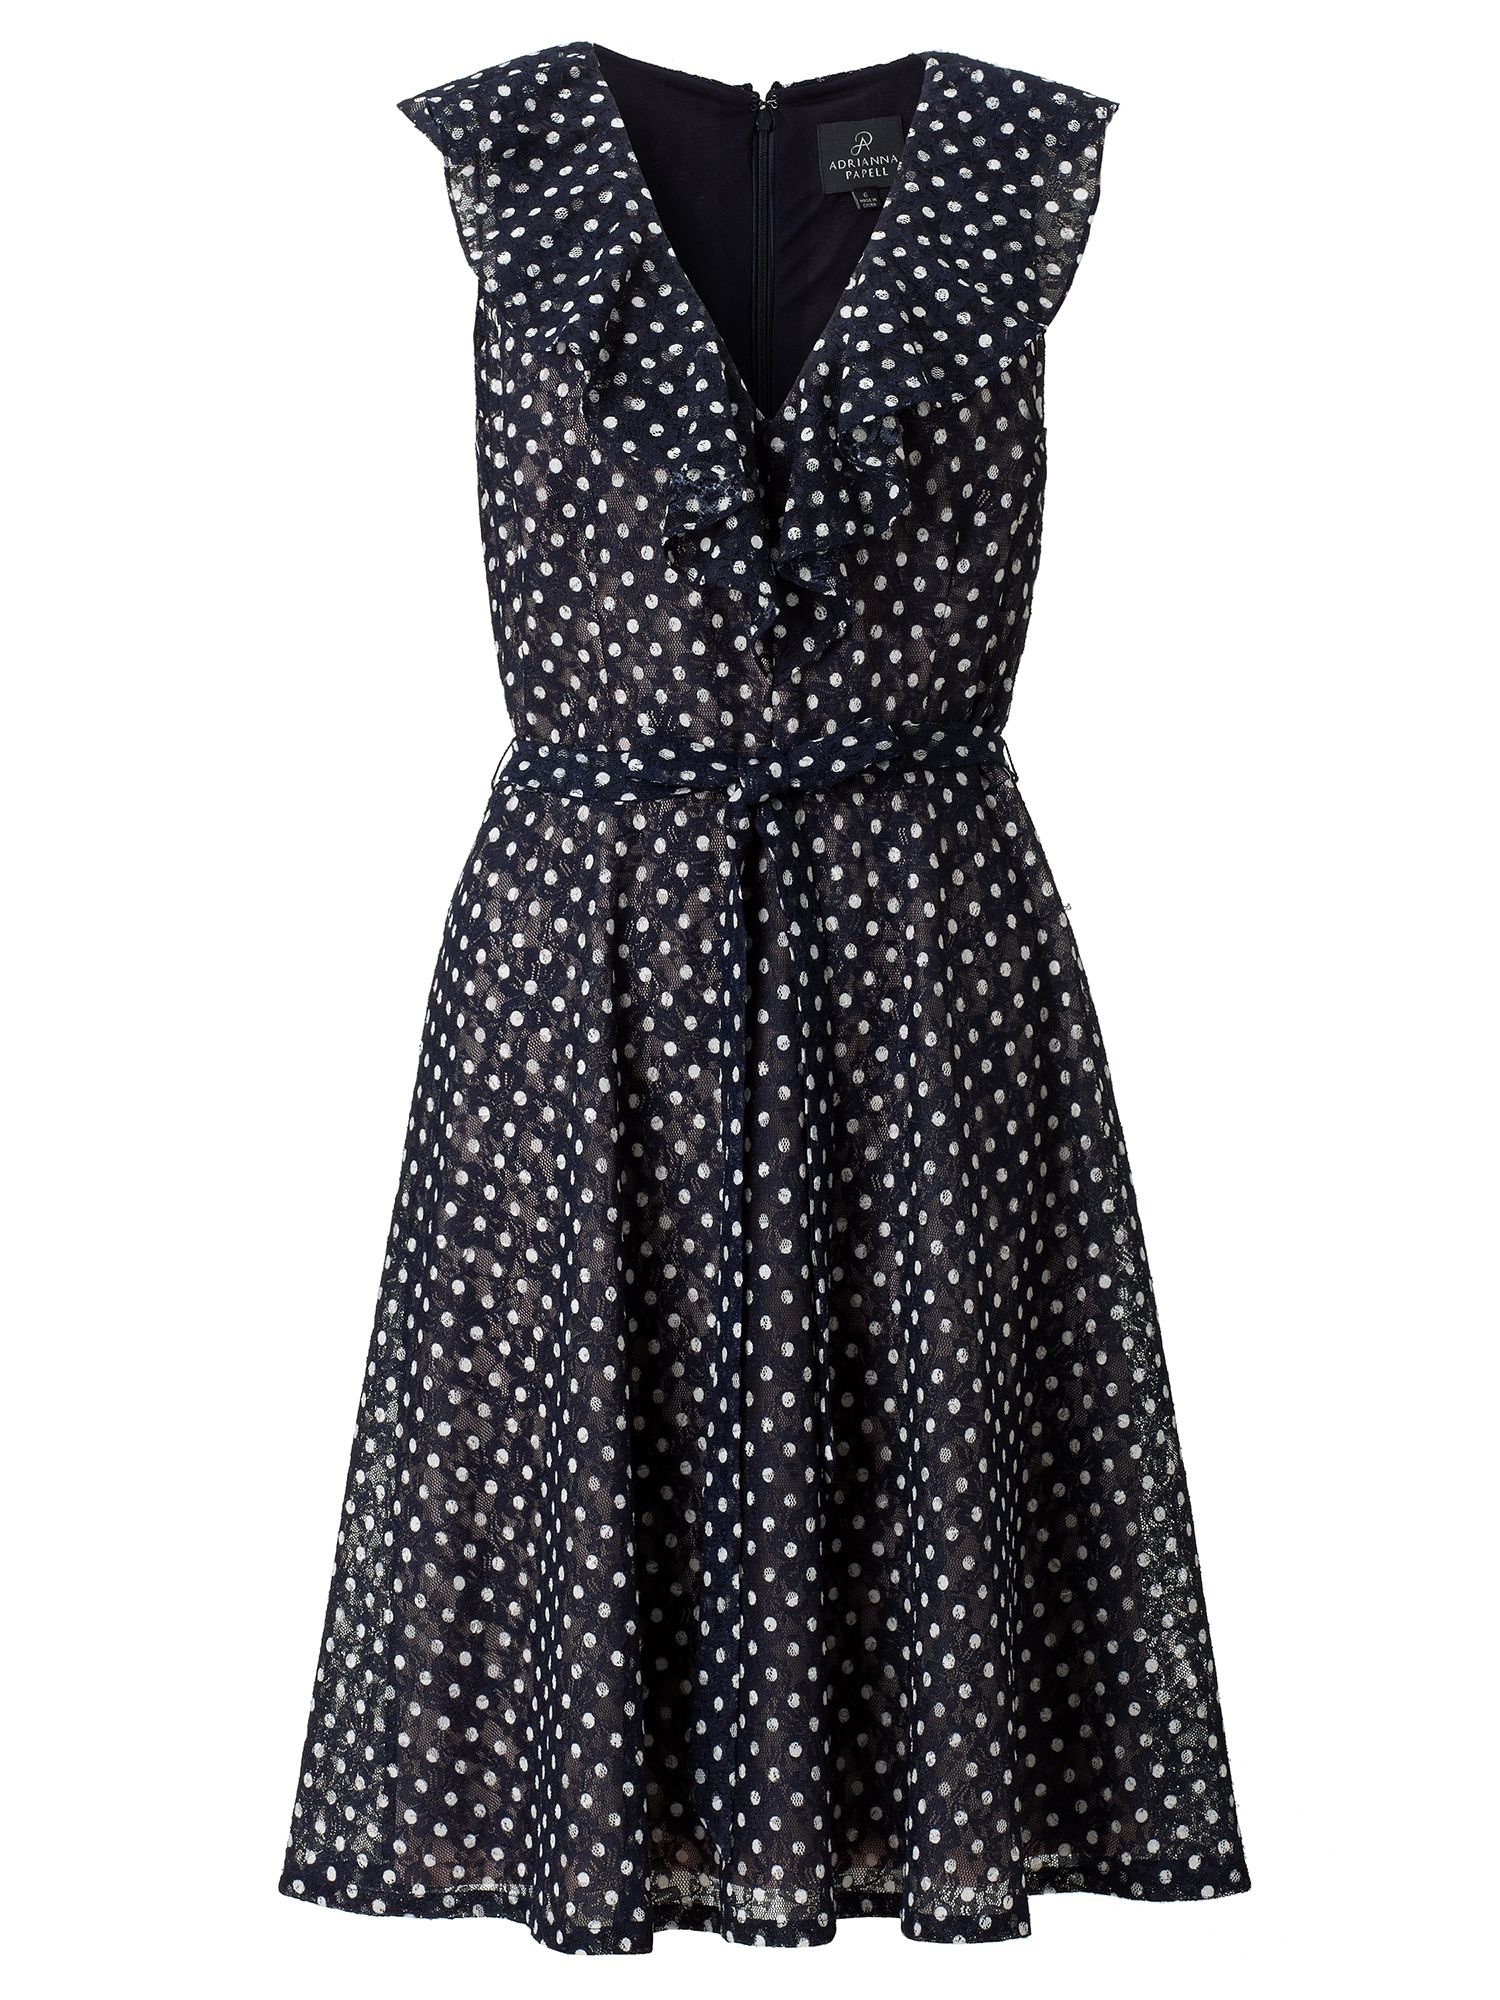 Adrianna papell Ruffle Polka Dot Lace Summer Dress in Blue | Lyst